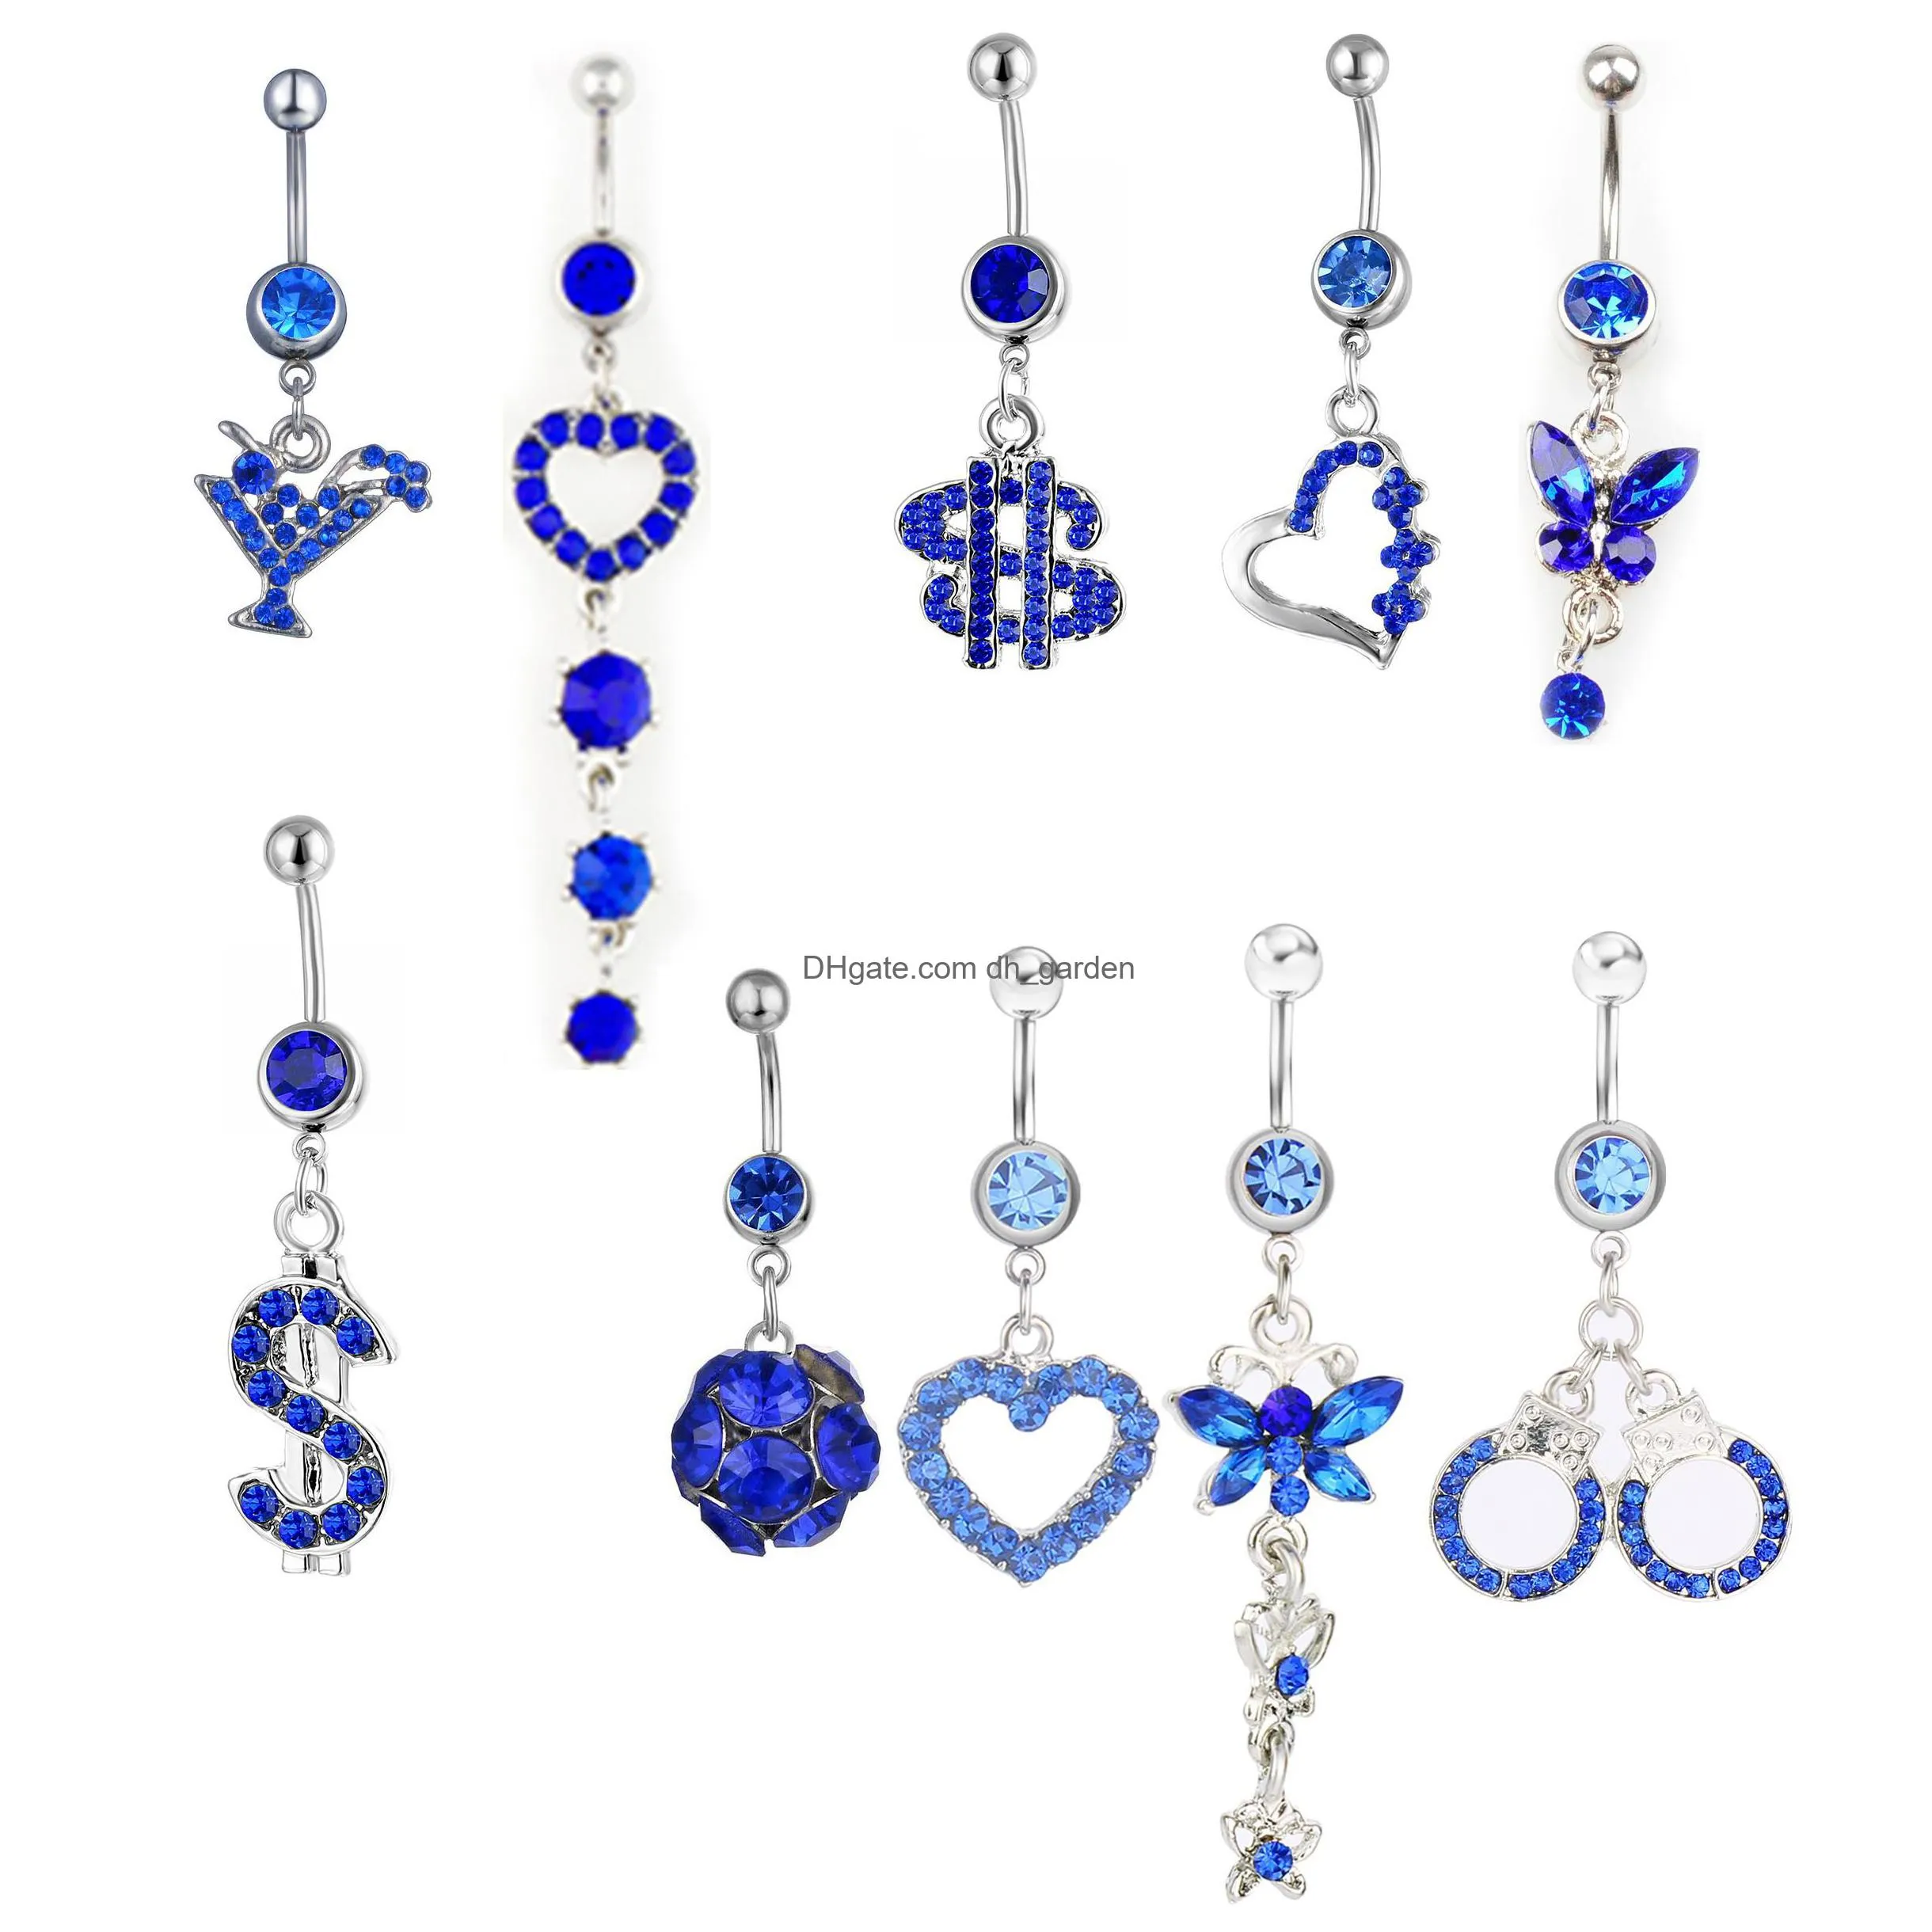 ab10001 belly navel button ring mix 10 styles clear ab colors 10 pcs frog crown dream catcher